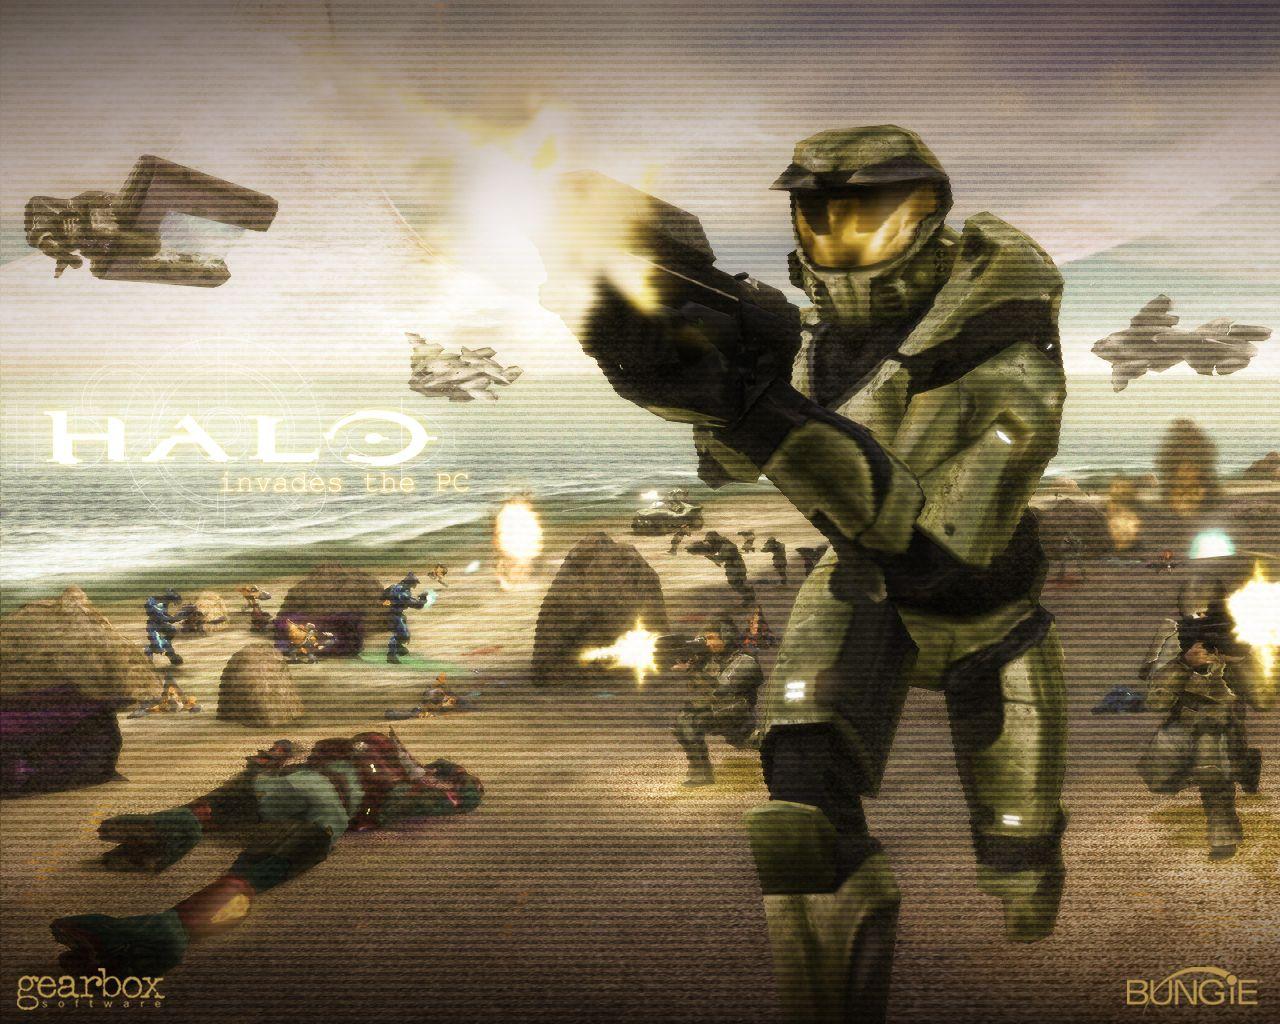 halo 1 game free download for pc full version windows 7